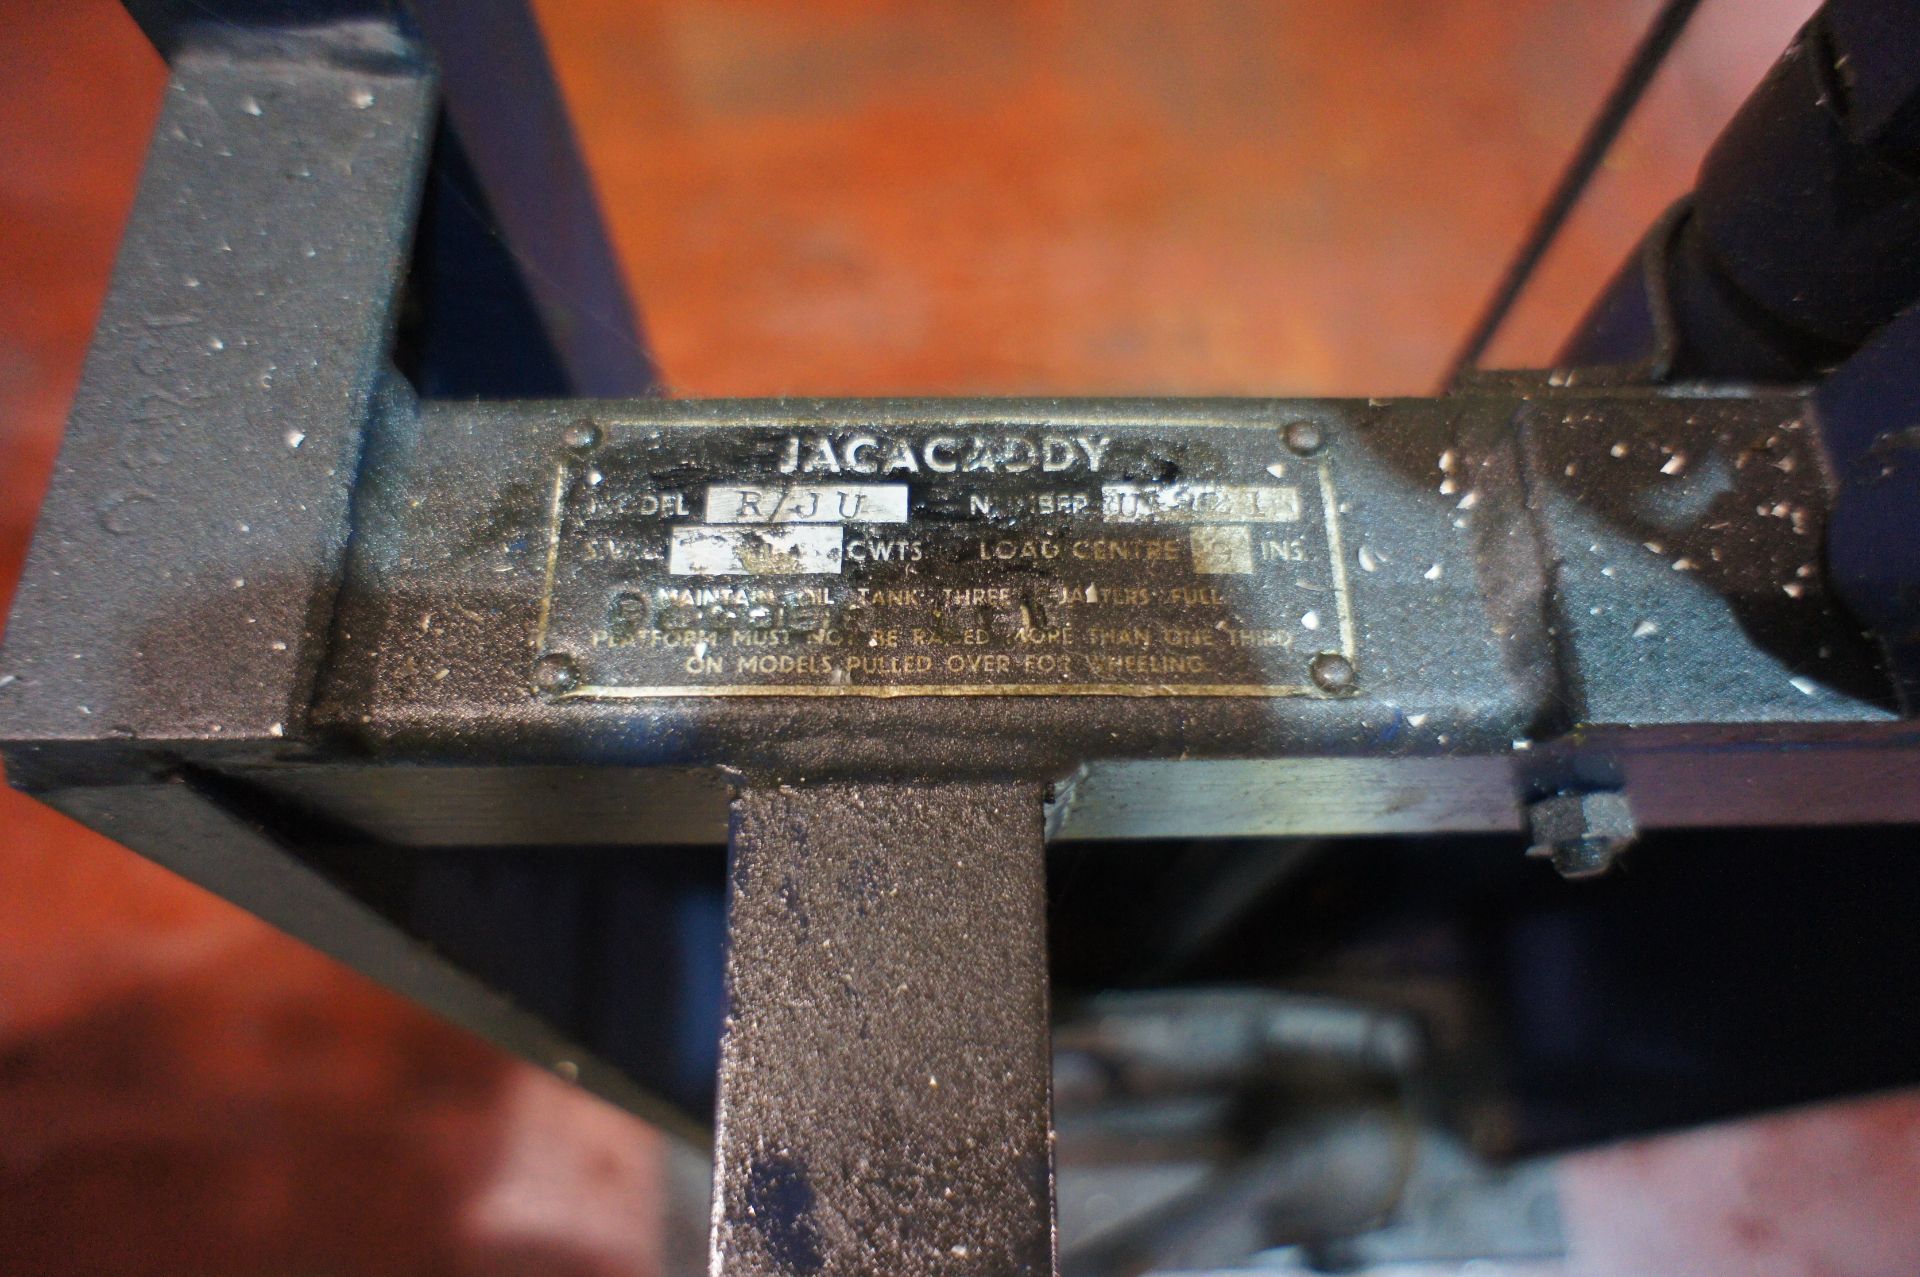 Jacacaddy Platfrom - Image 3 of 3